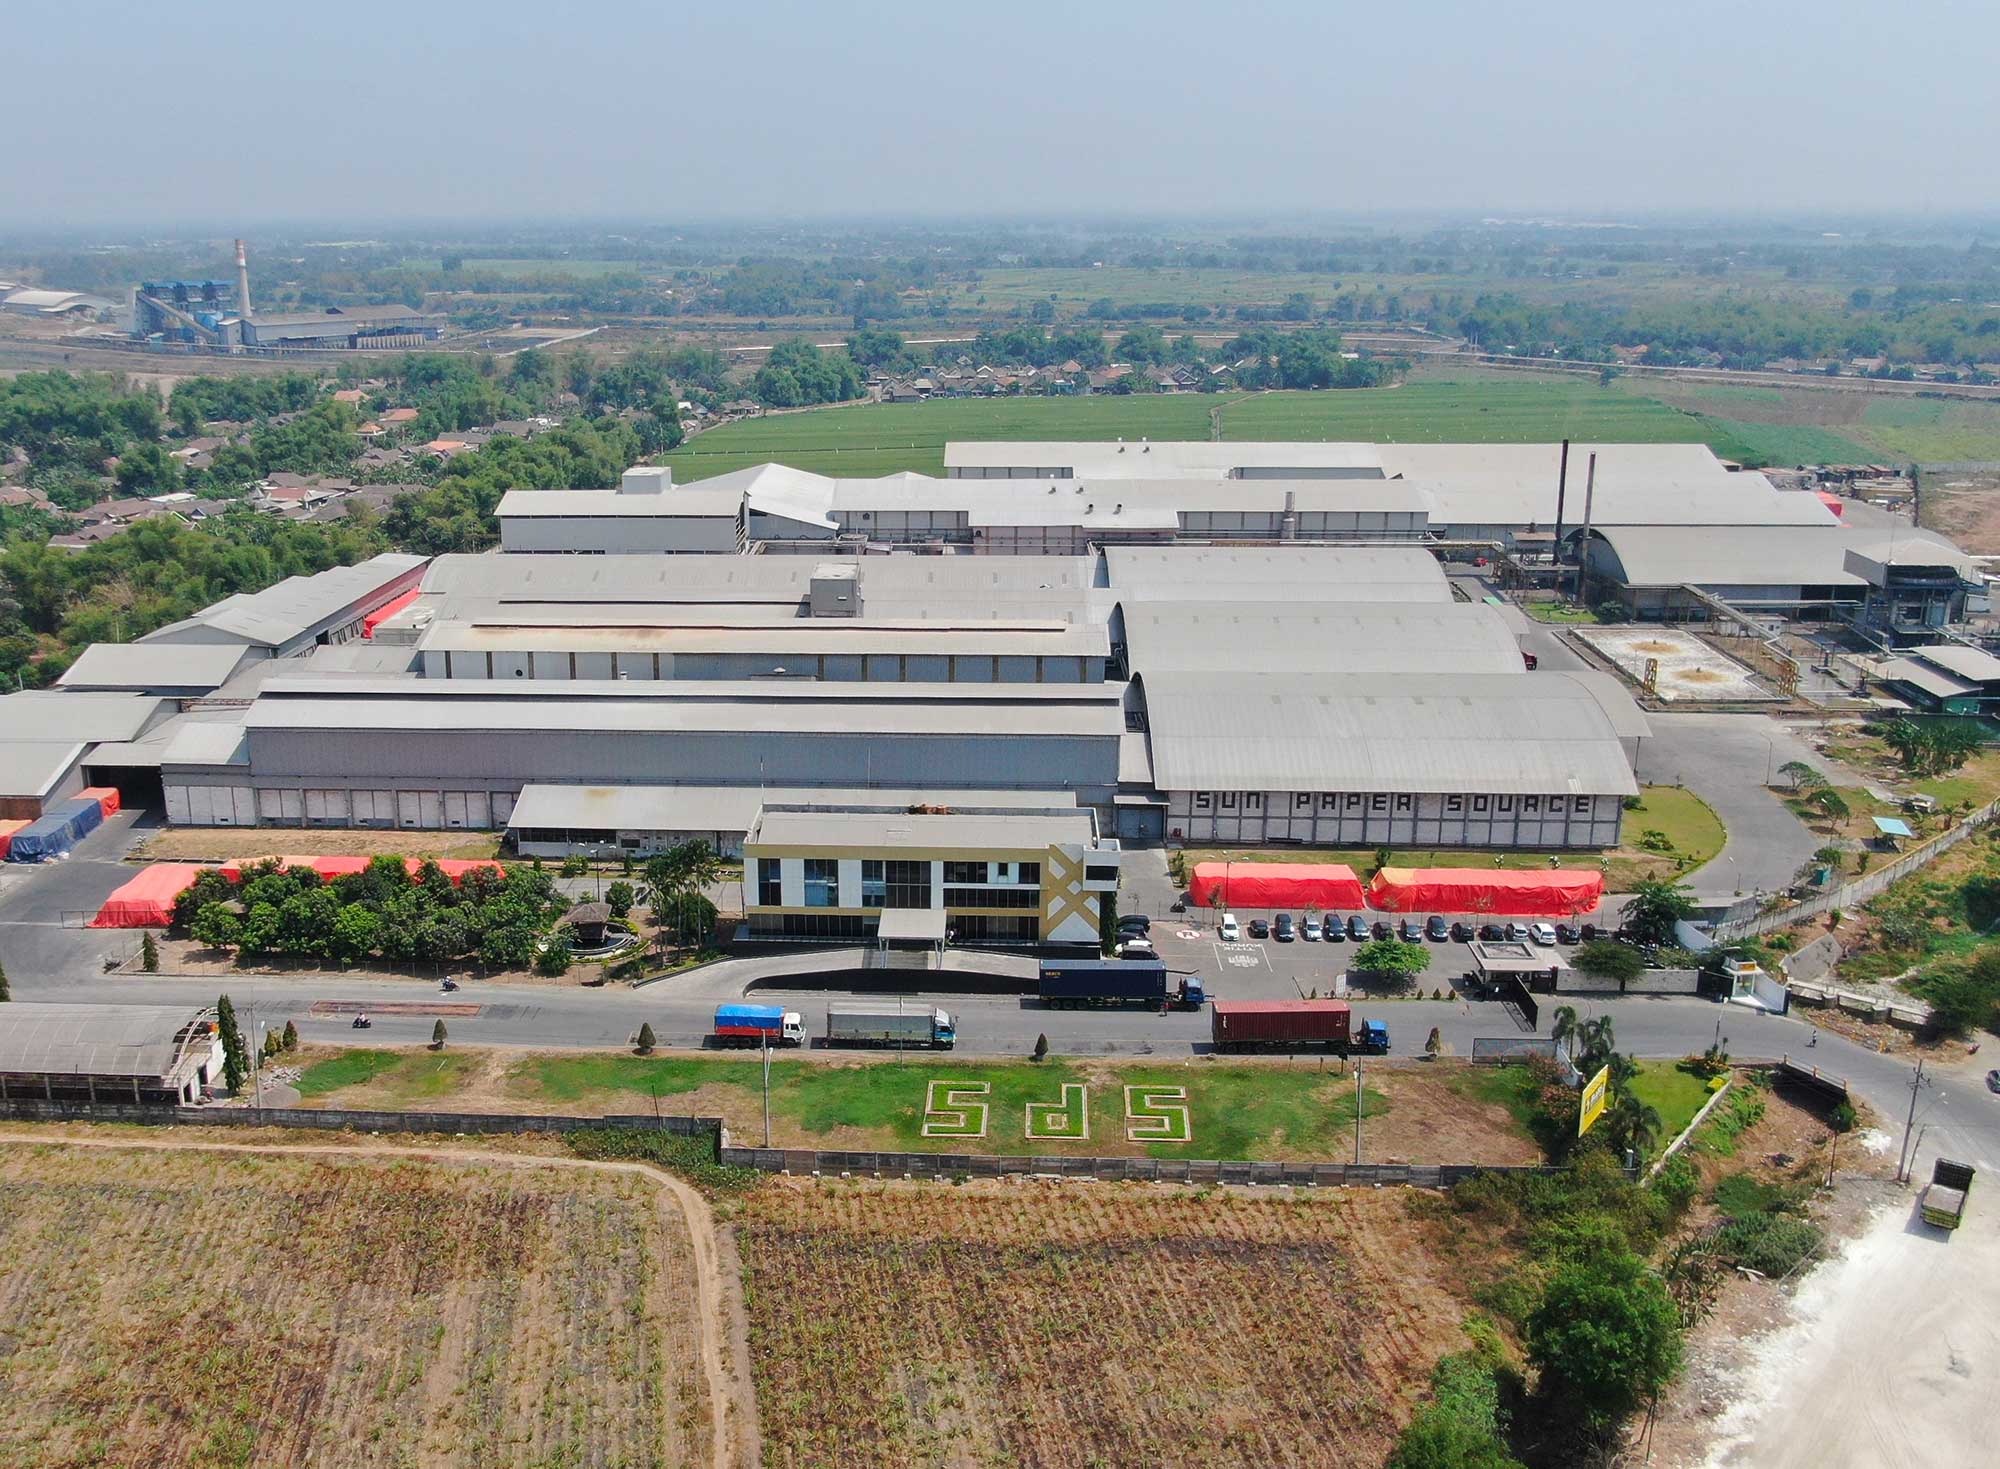 Sun Paper Source’s plant in Ngoro, Mojokerto, East Java: “Unprecedented sales” after navigating the challenges of Covid-19